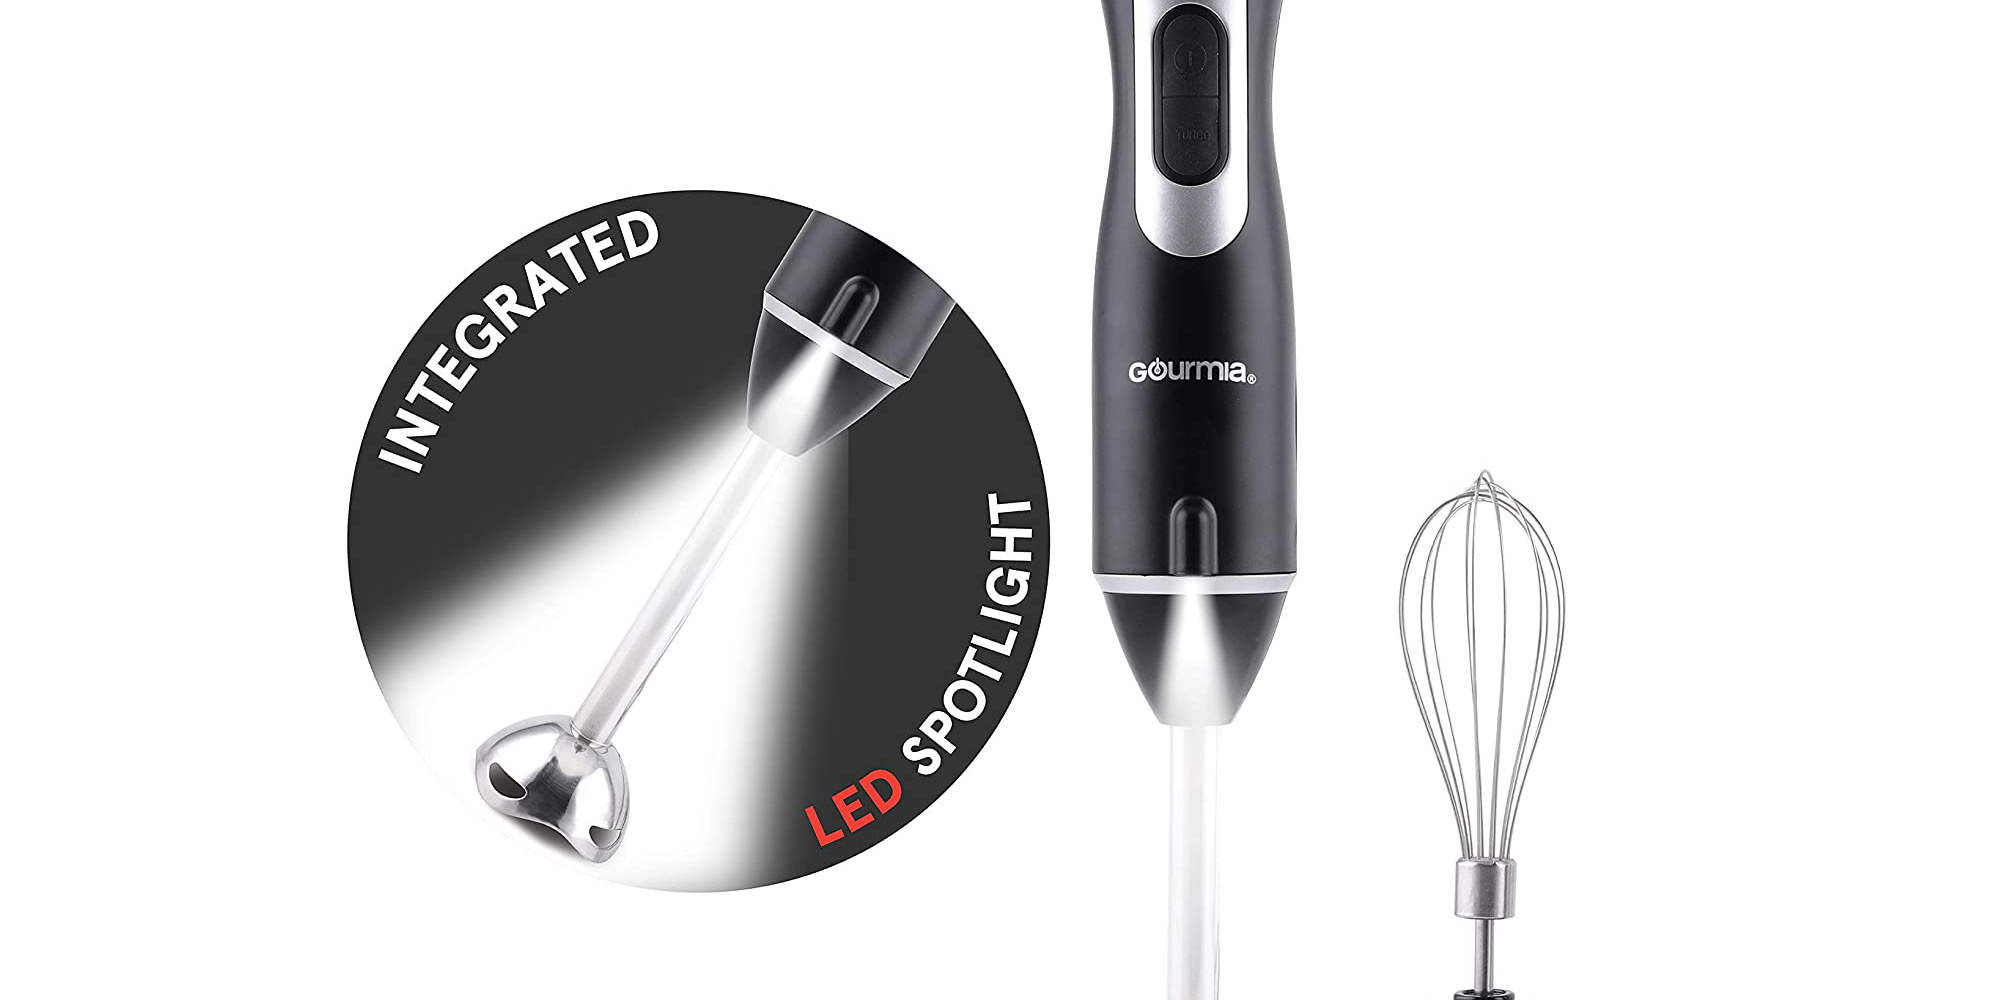 Gourmia Hand Held Immersion Blender and Smoothie Maker review